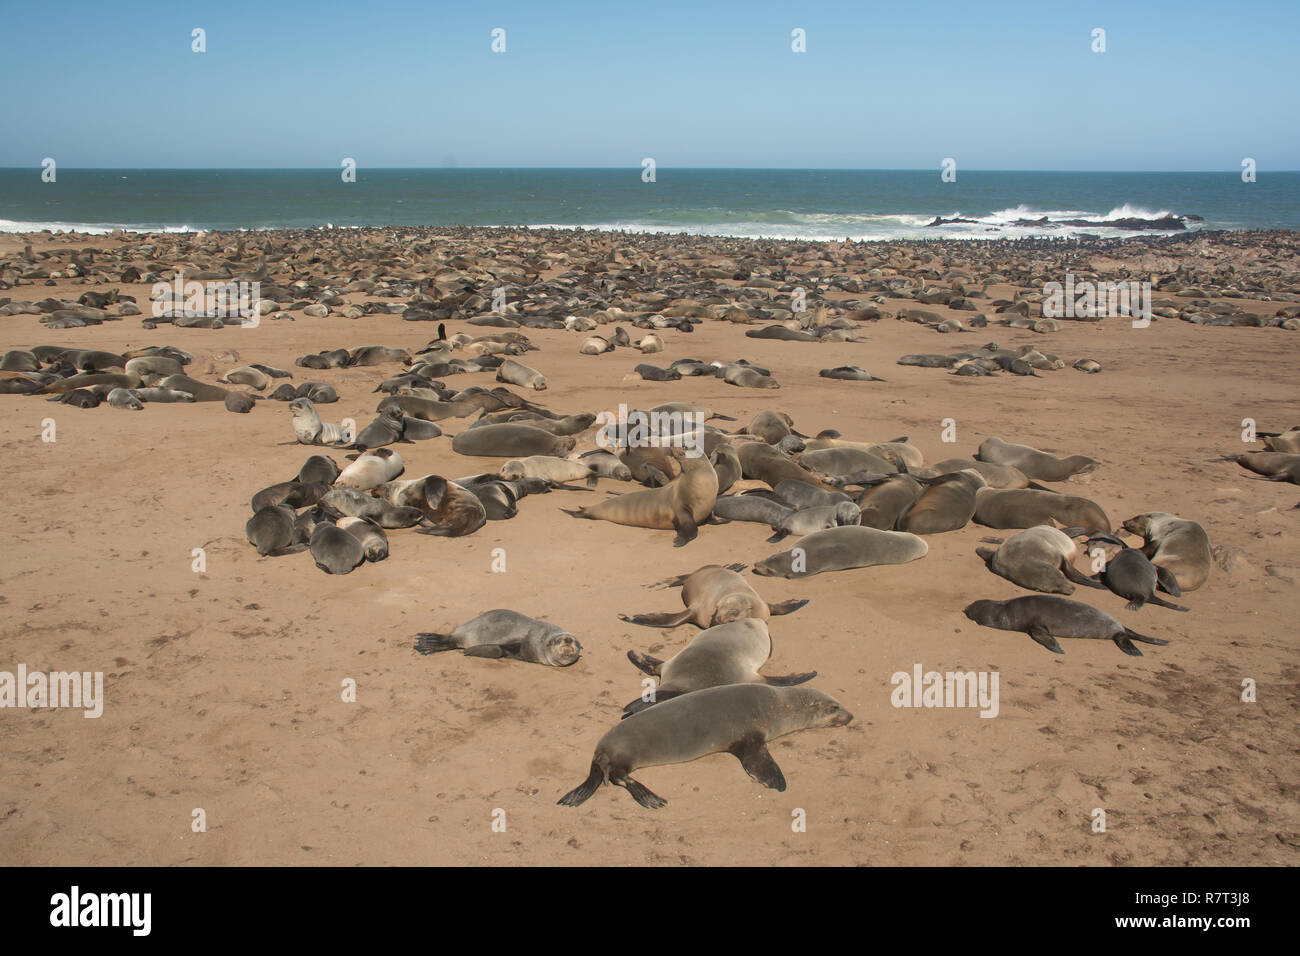 Cape fur seal colony in Namibia Stock Photo